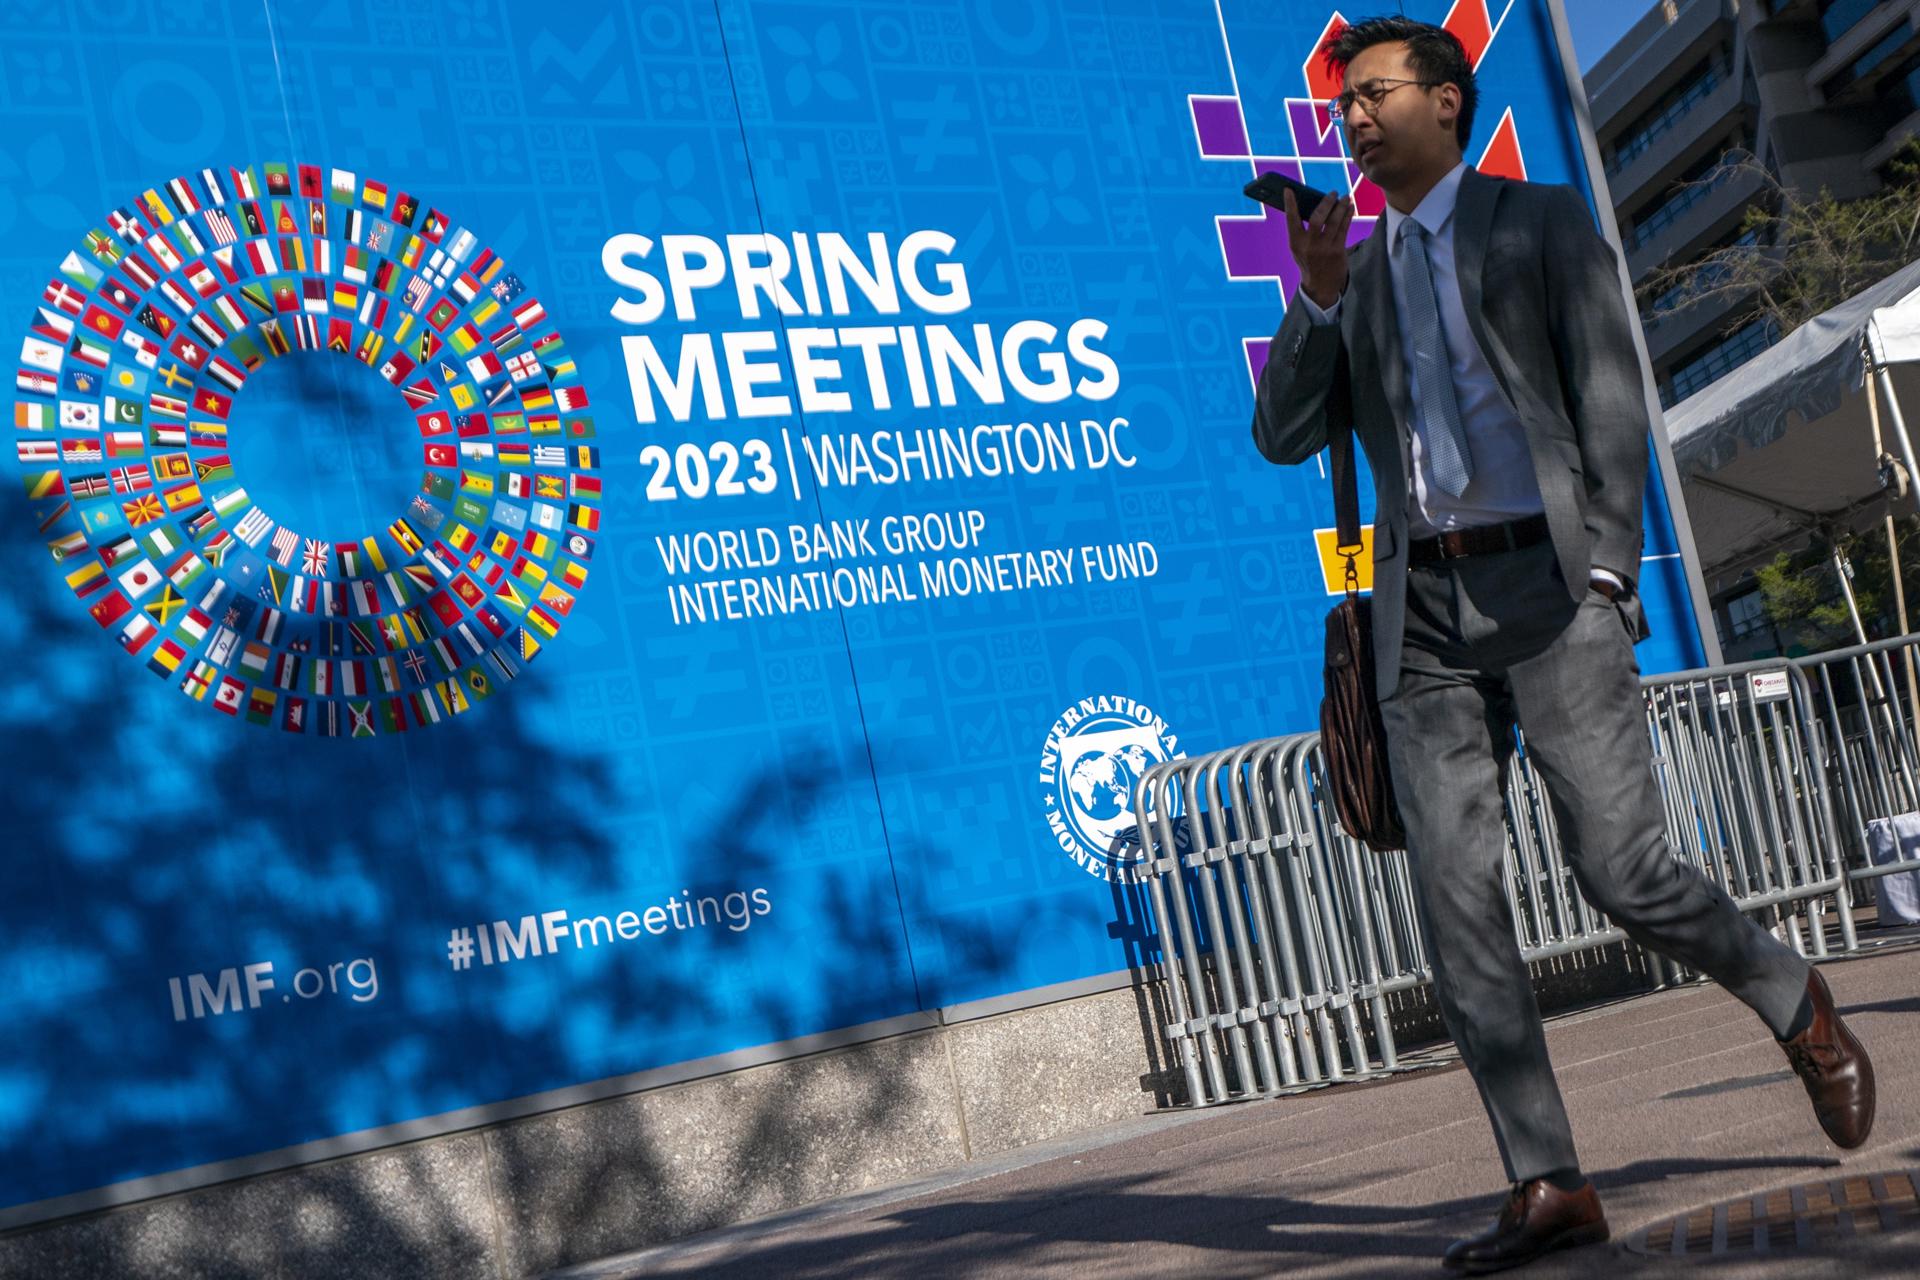 View of the International Monetary Fund building during the spring meetings of the IMF and the World Bank in Washington DC on April 10, 2023. EFE/EPA/Shawn Thew